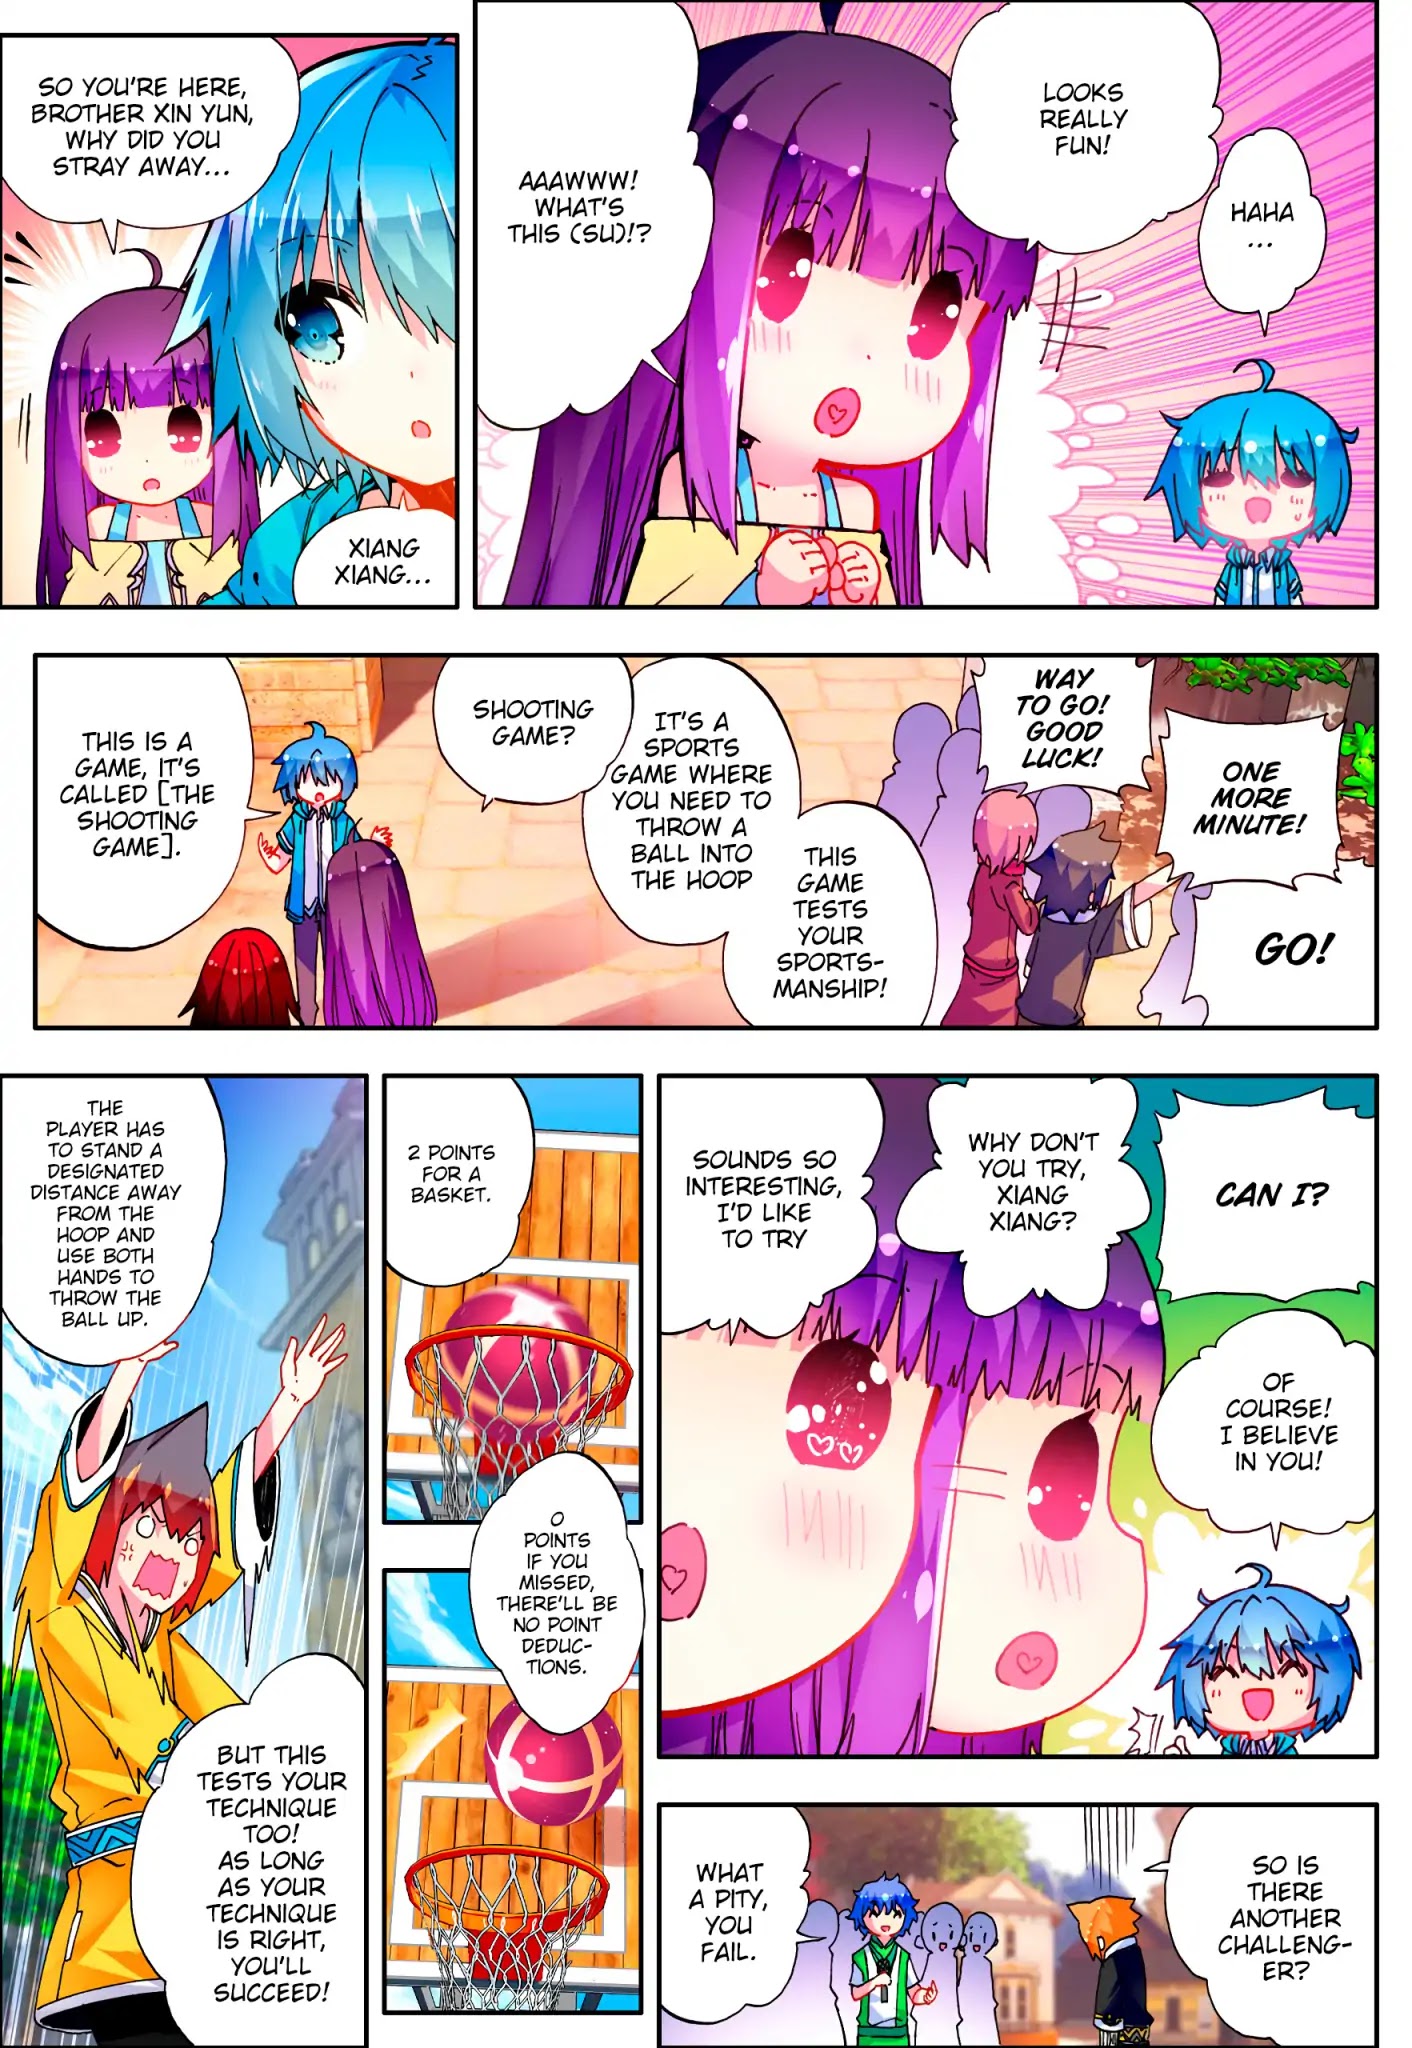 X Epoch of Dragon Chapter 49 : I’m not that awesome(su), the games were just(su) too easy!